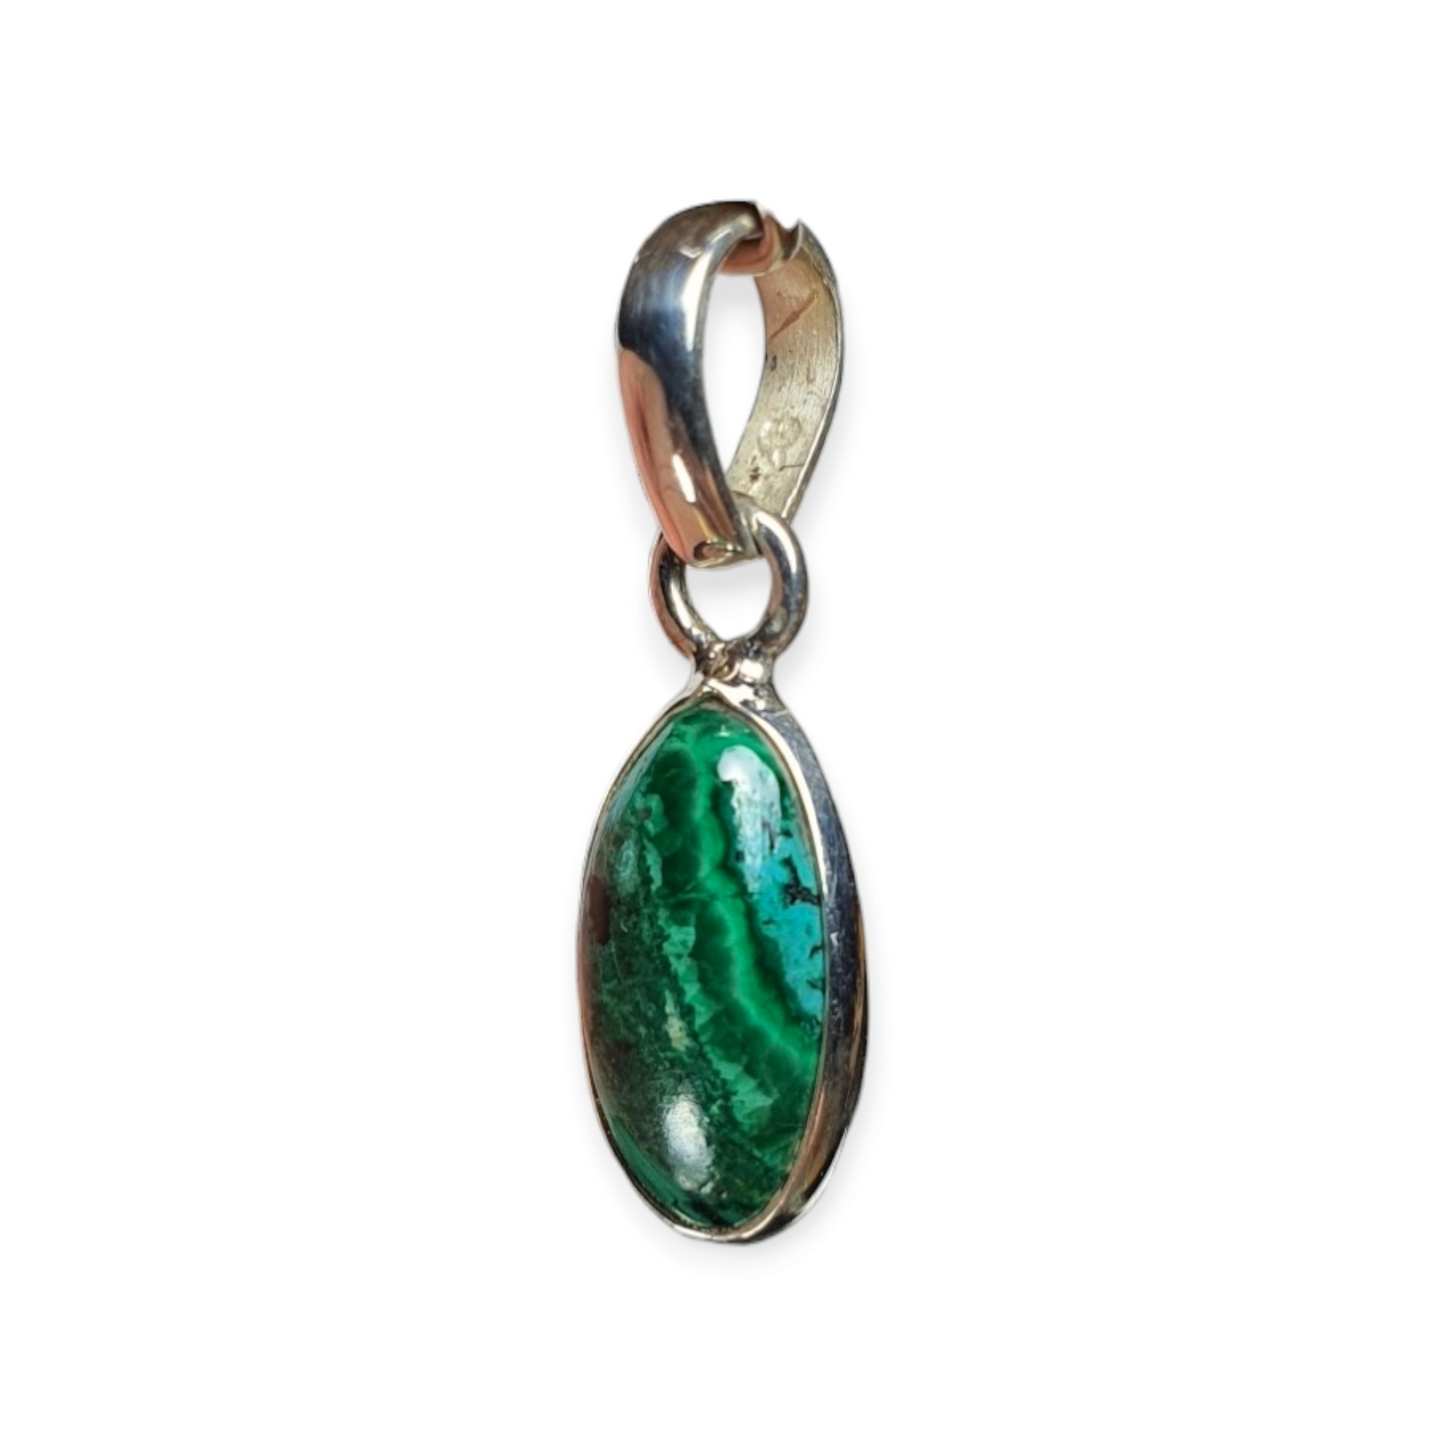 Crystals - Chrysocolla Pendant - Sterling Silver